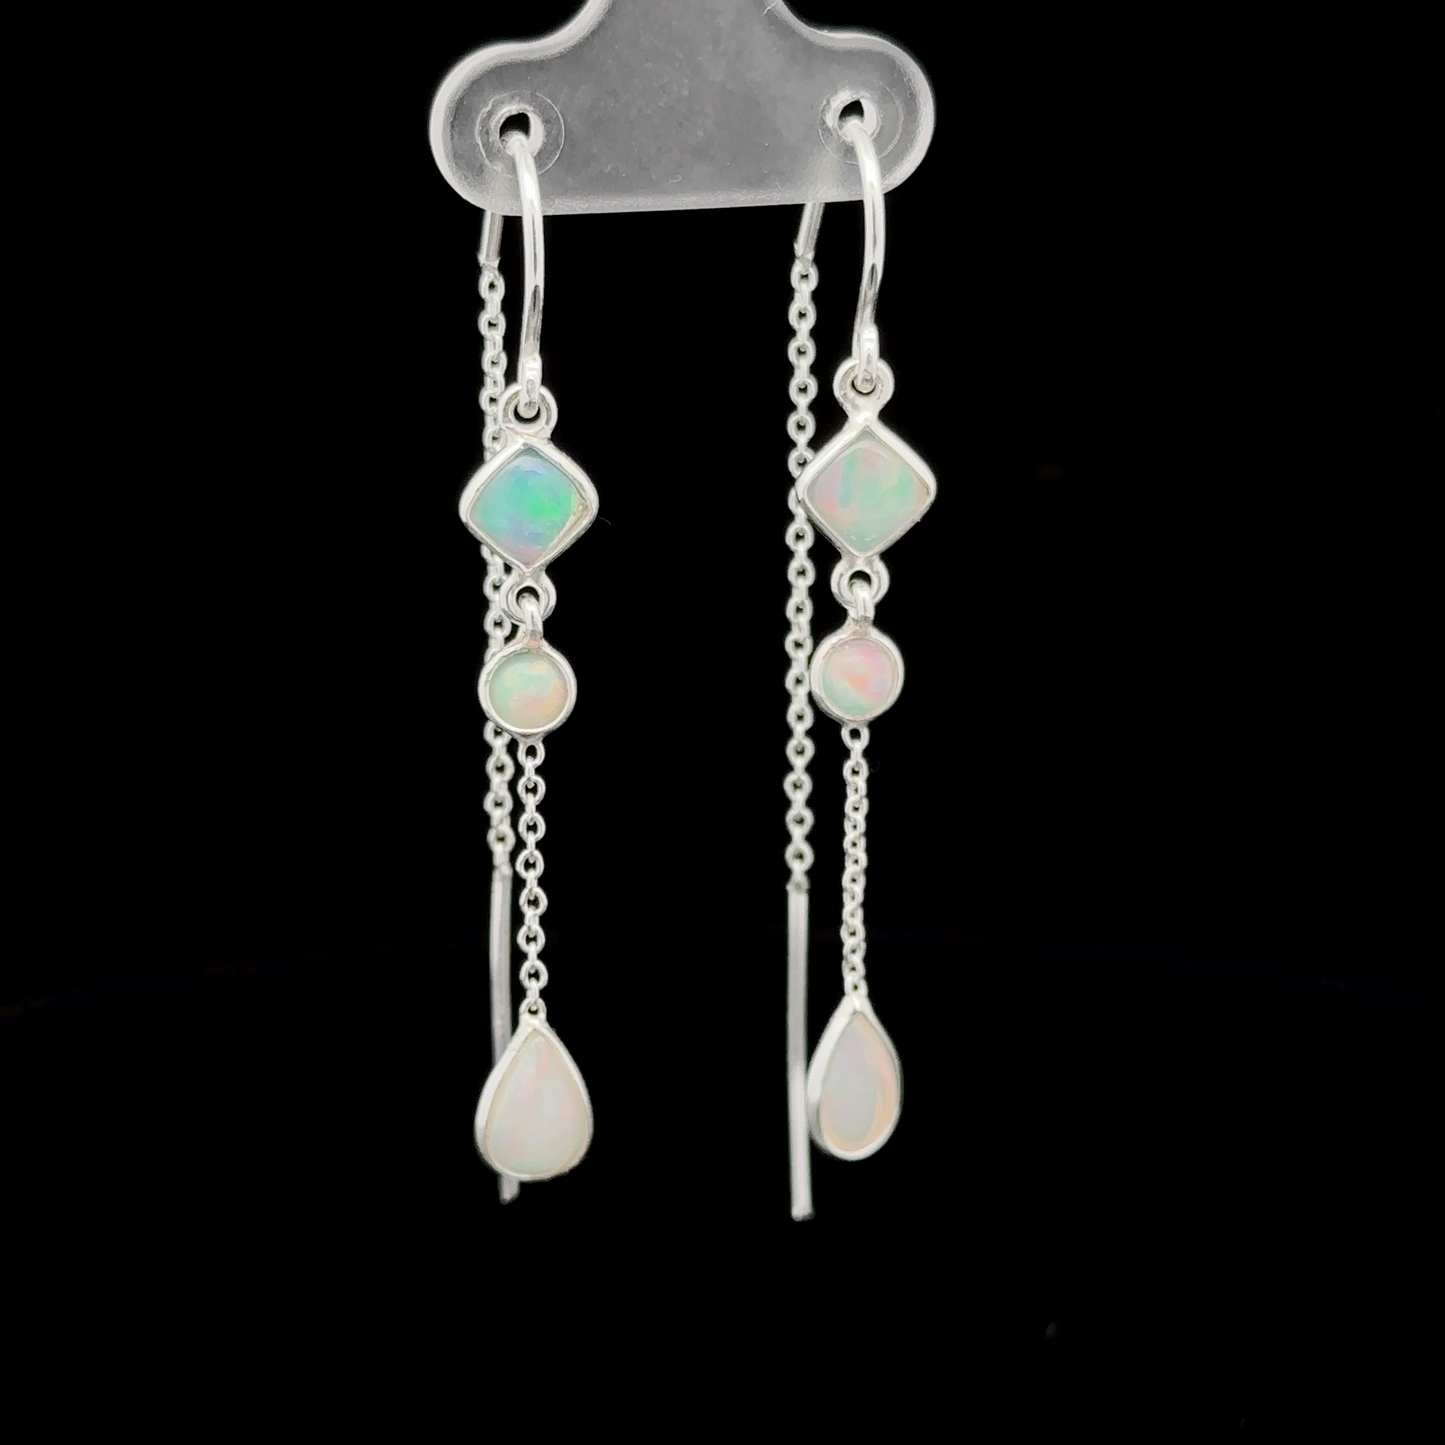 
                  
                    Elegant Ethiopian Opal Threader Earrings featuring four Ethiopian opal gemstones connected by delicate chains, two gemstones on each earring, displayed against a black background.
                  
                